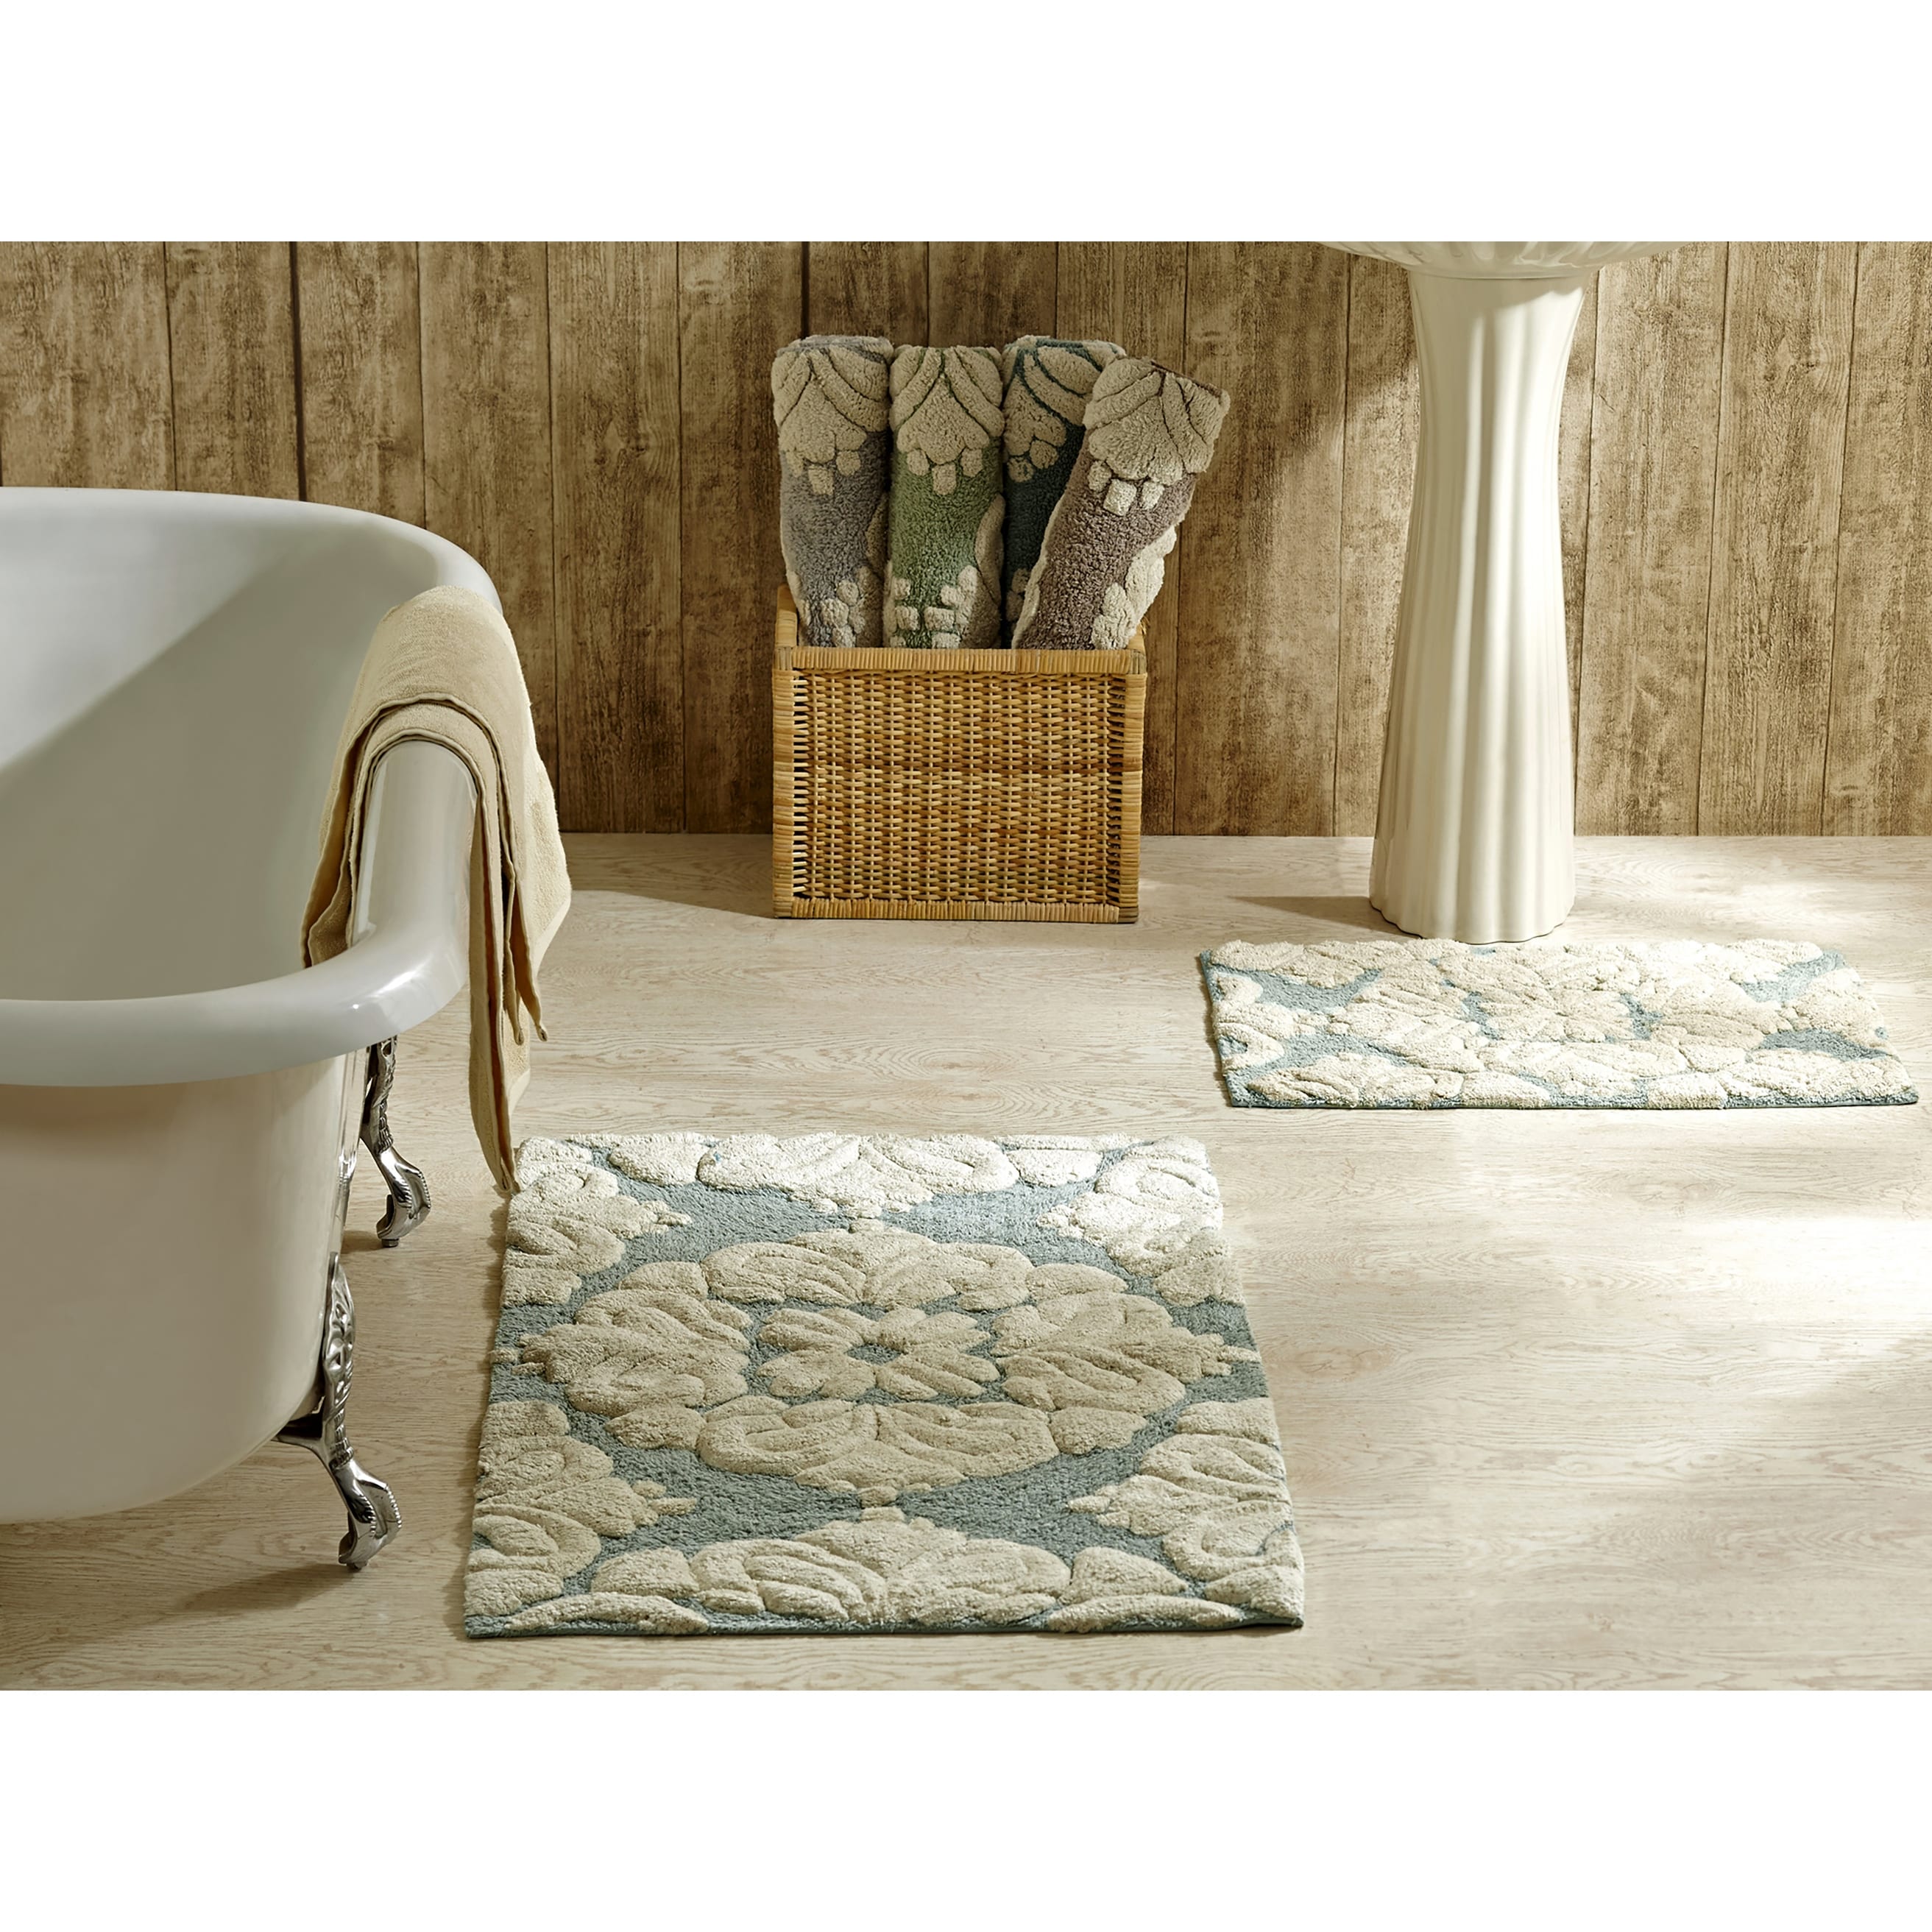 https://ak1.ostkcdn.com/images/products/is/images/direct/02e5429f8352f168c0f88e67524eb5423d114c8a/Better-Trends-Medallion-Tufted-Bath-Mat-Rug-100%25-Cotton.jpg